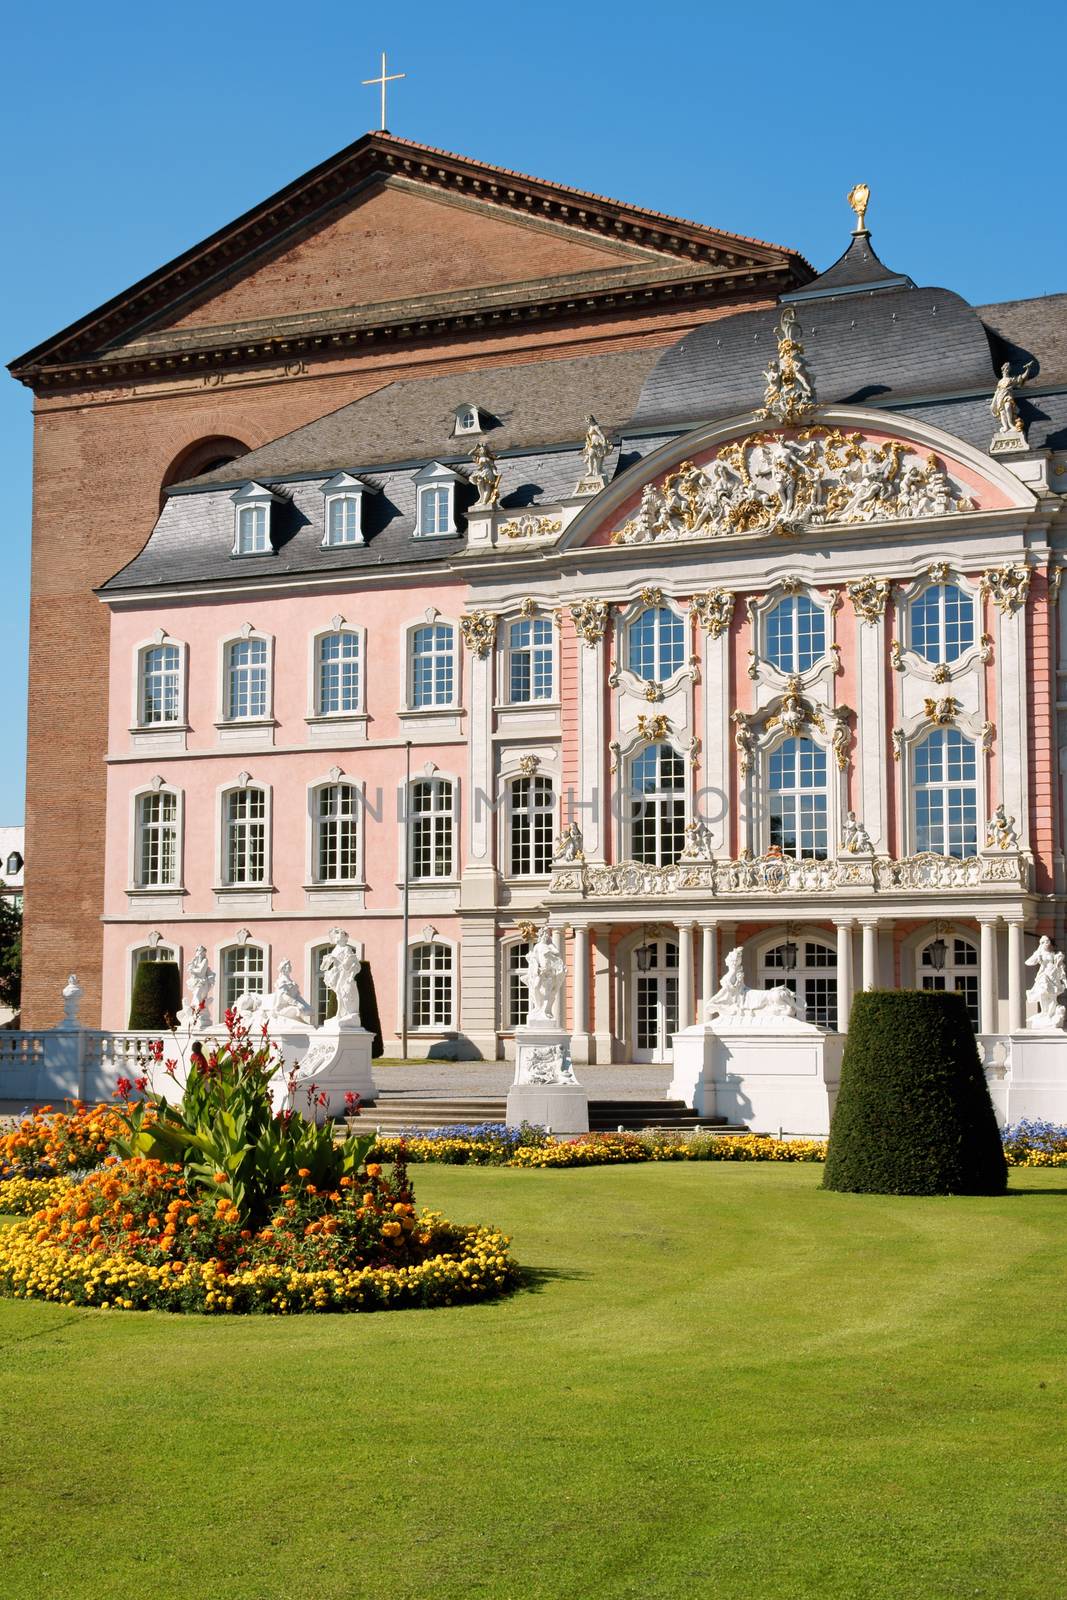 South wing of Prince-electors Palace in Trier, Germany. It was built in rococo style from 1756 by architect Johannes Seiz and the sculptor Ferdinand Tietz. In the background Constantine Basilica.